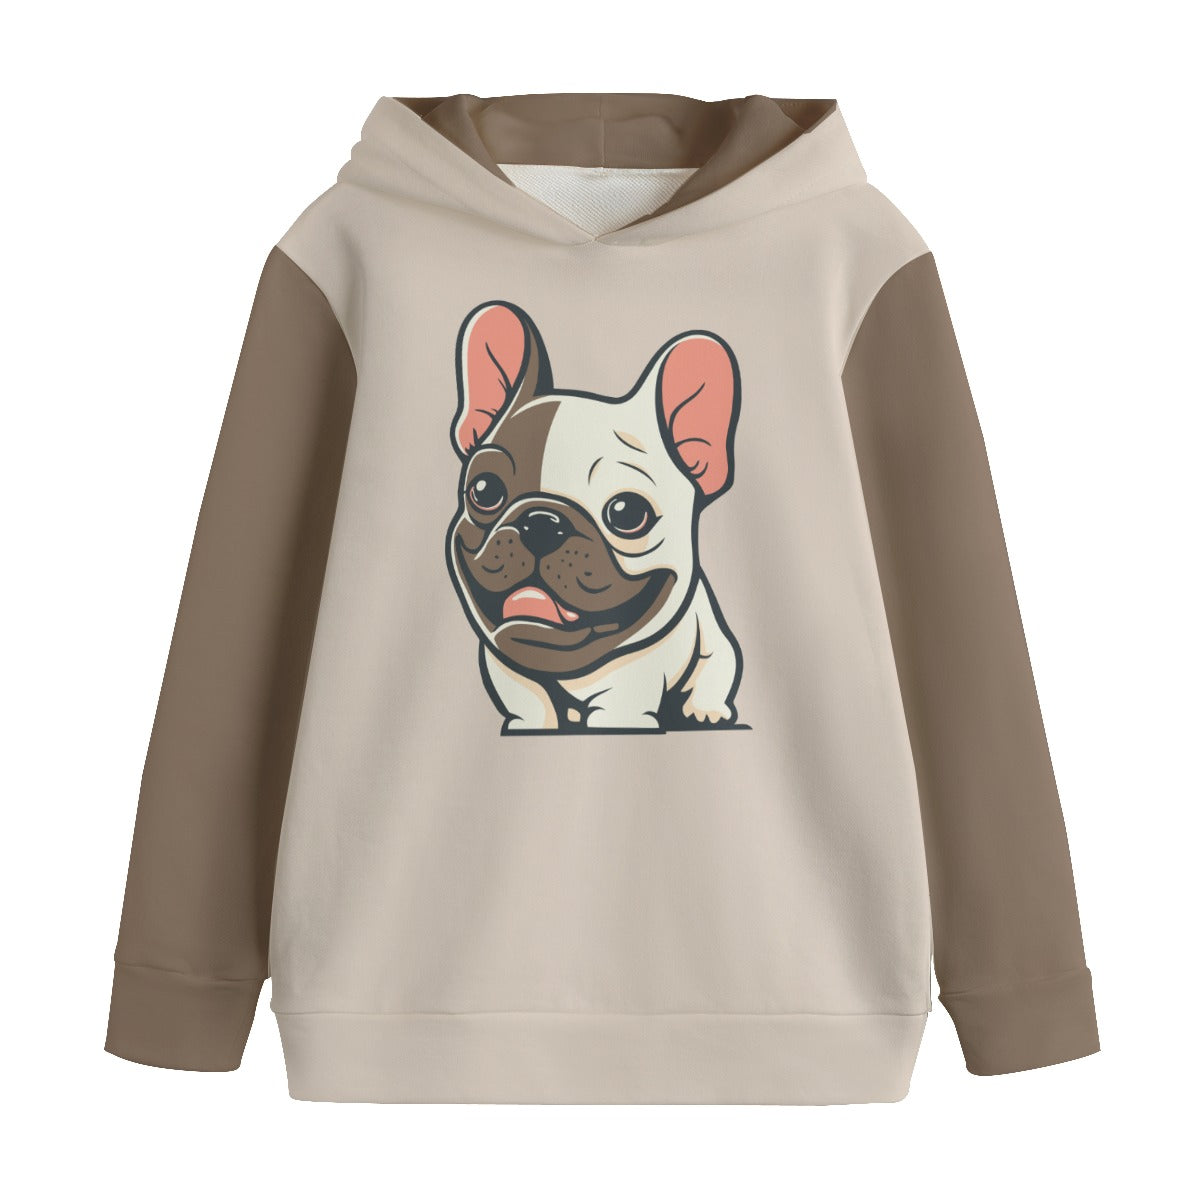 Princess - All-Over Print Kid's Pullover Hoodie